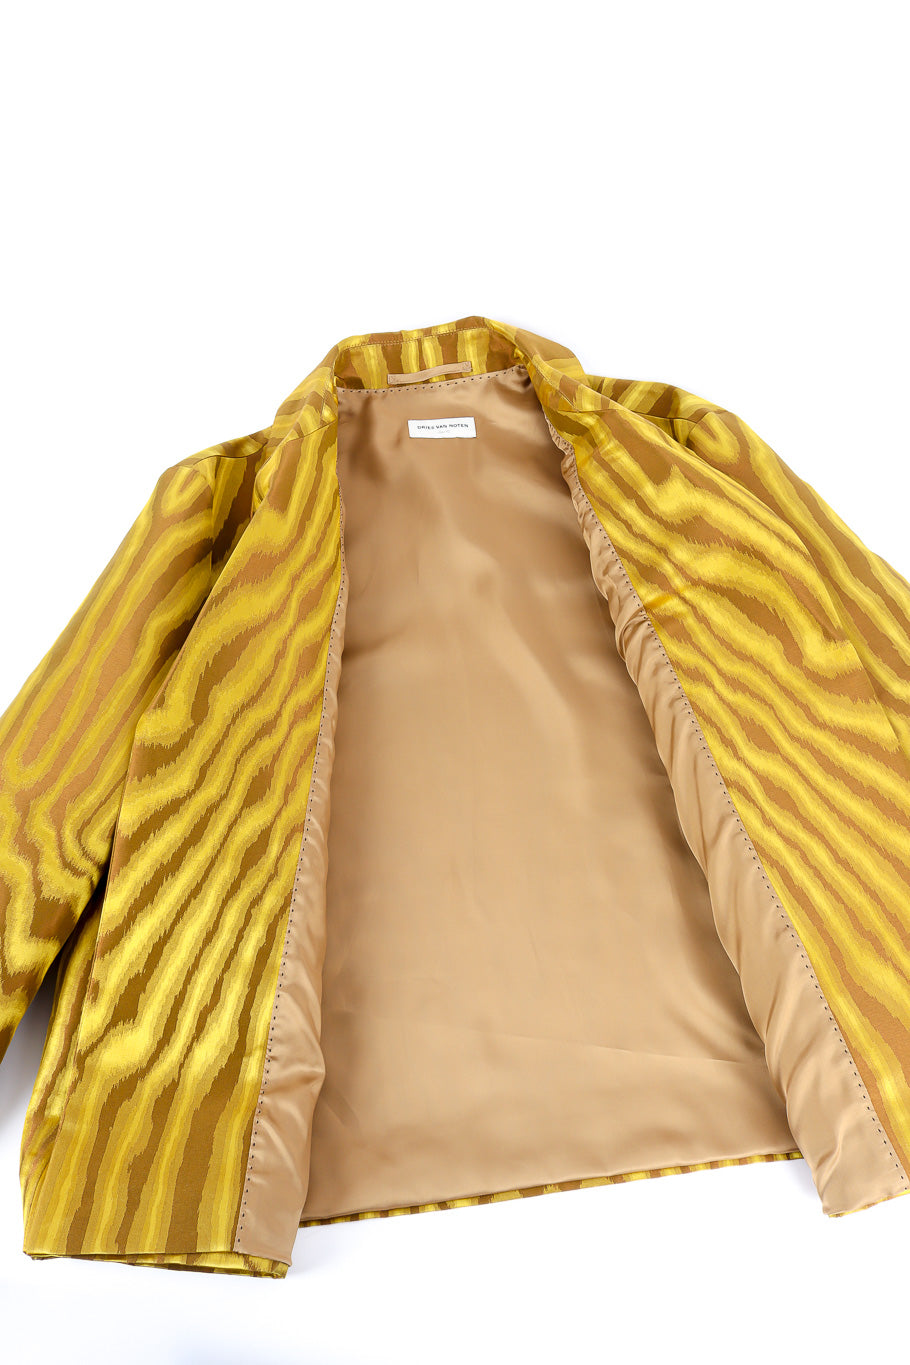 Dries van Noten abstract moire cropped jacket lining detail @recessla